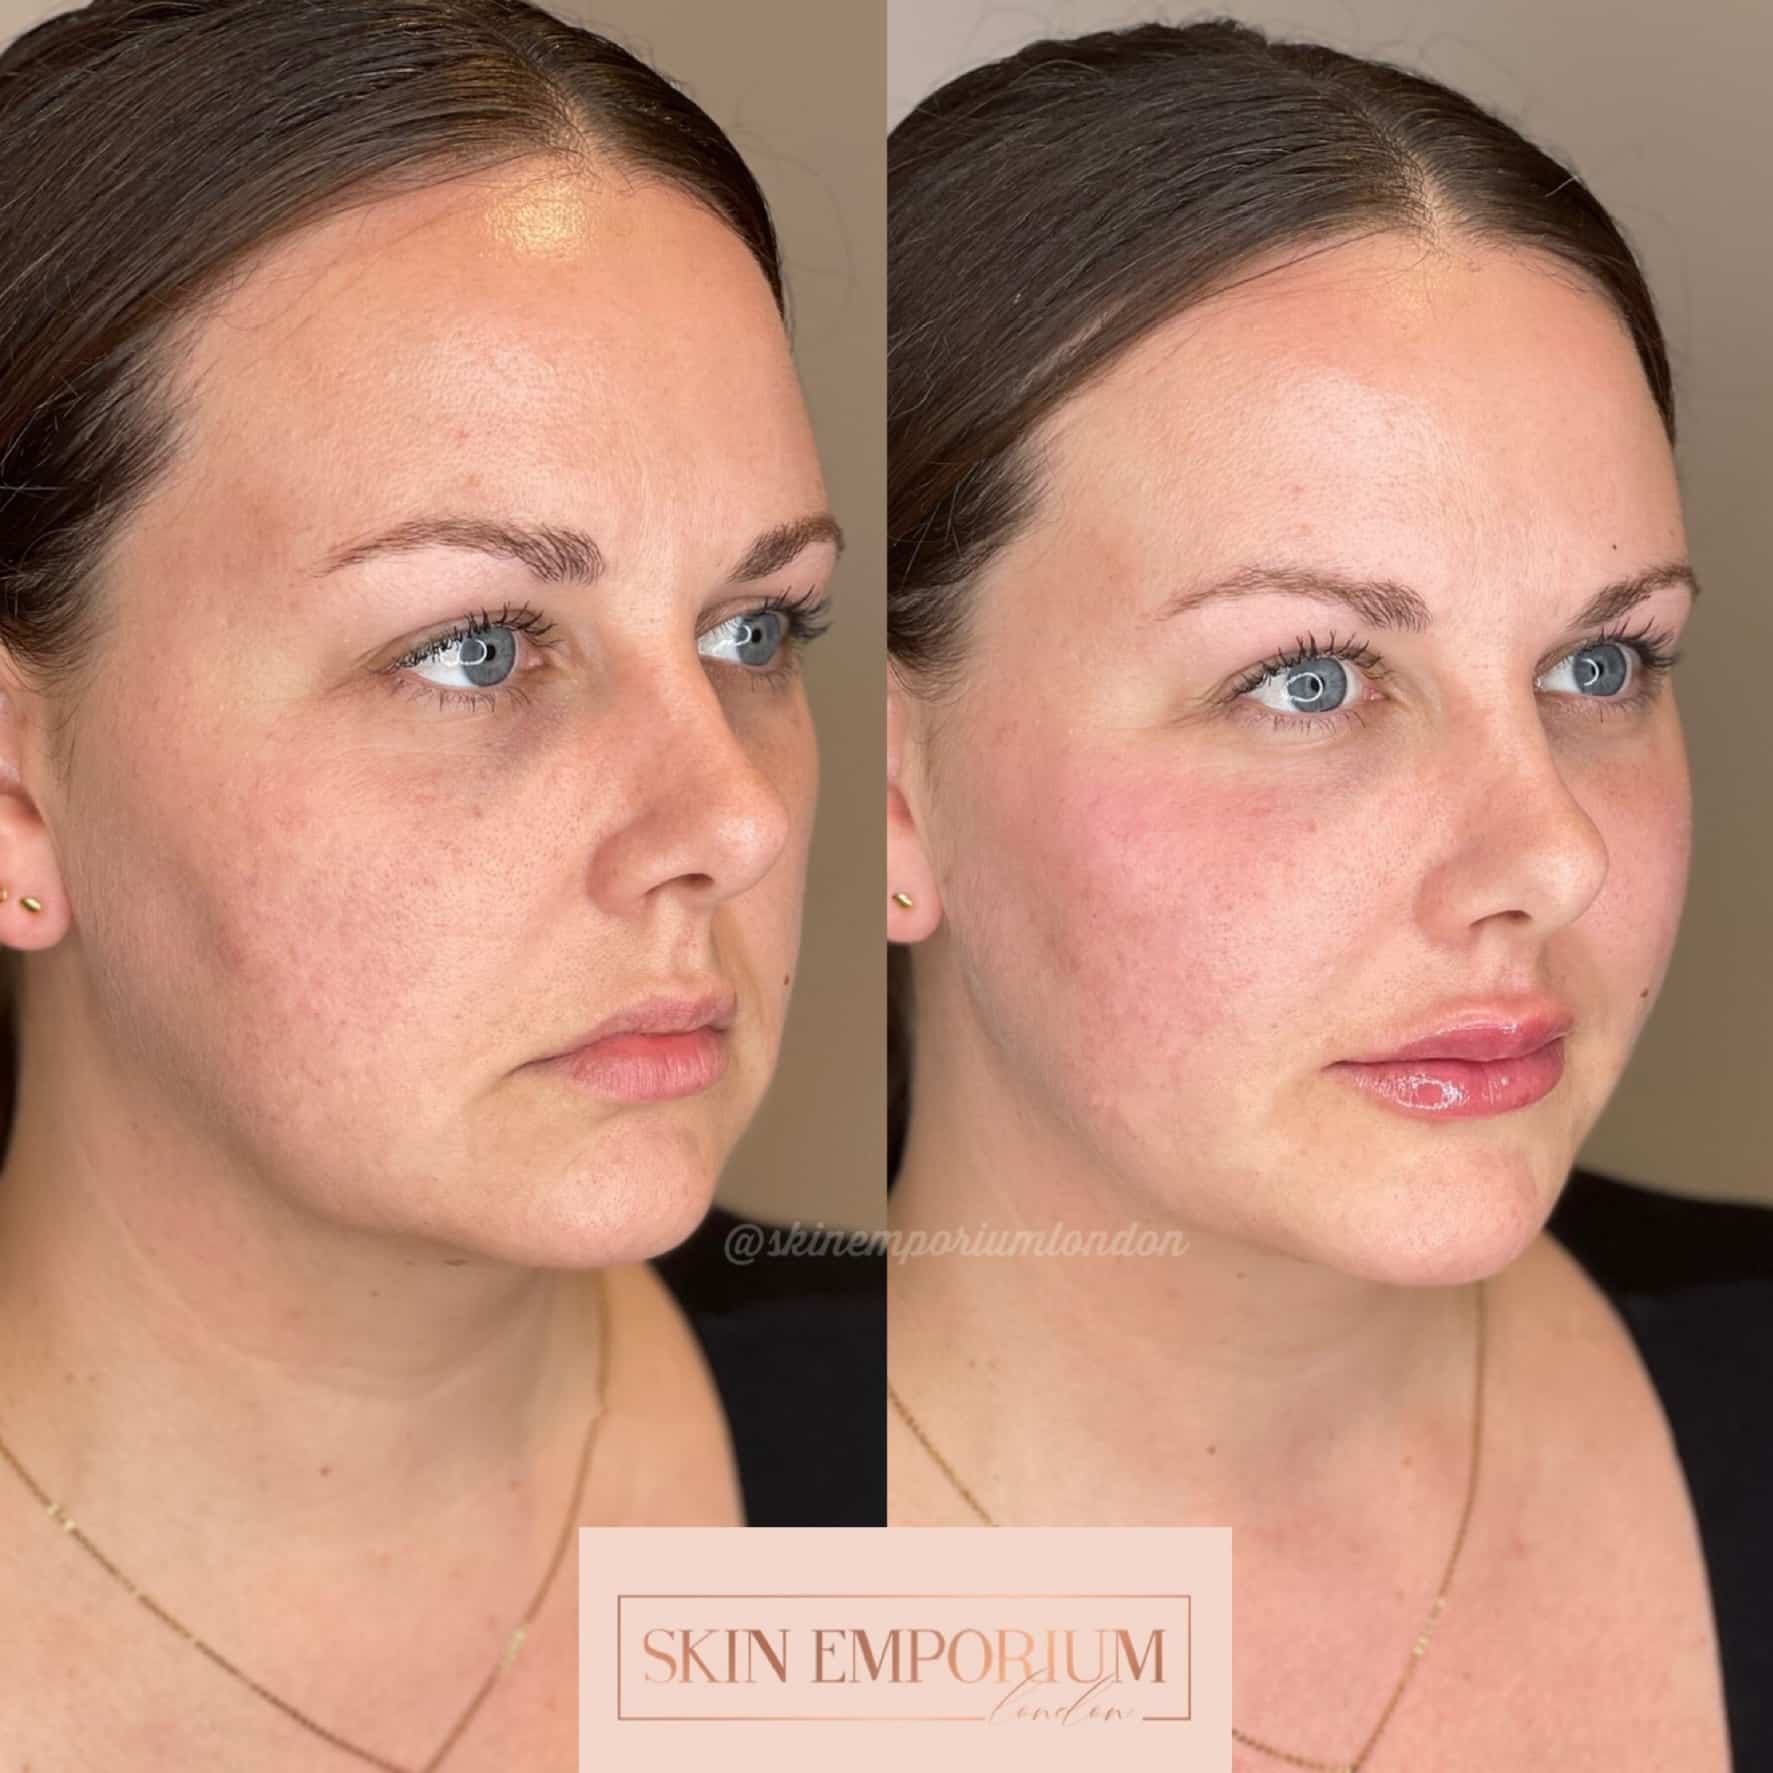 efore and after photo of a women having received lip fillers at the Skin Emporium in Clapham, London.